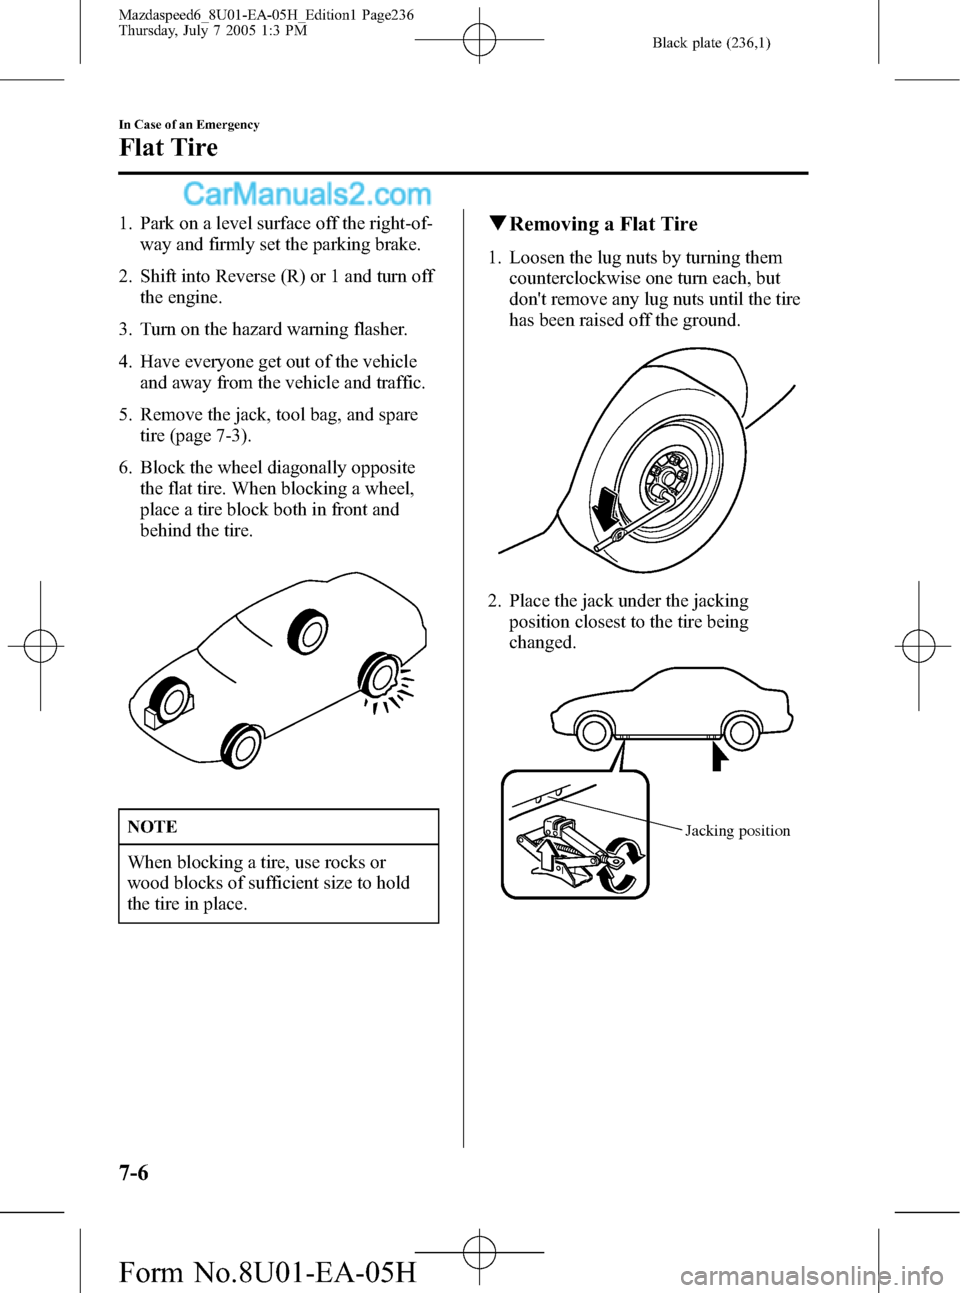 MAZDA MODEL MAZDASPEED 6 2006  Owners Manual (in English) Black plate (236,1)
1. Park on a level surface off the right-of-
way and firmly set the parking brake.
2. Shift into Reverse (R) or 1 and turn off
the engine.
3. Turn on the hazard warning flasher.
4.